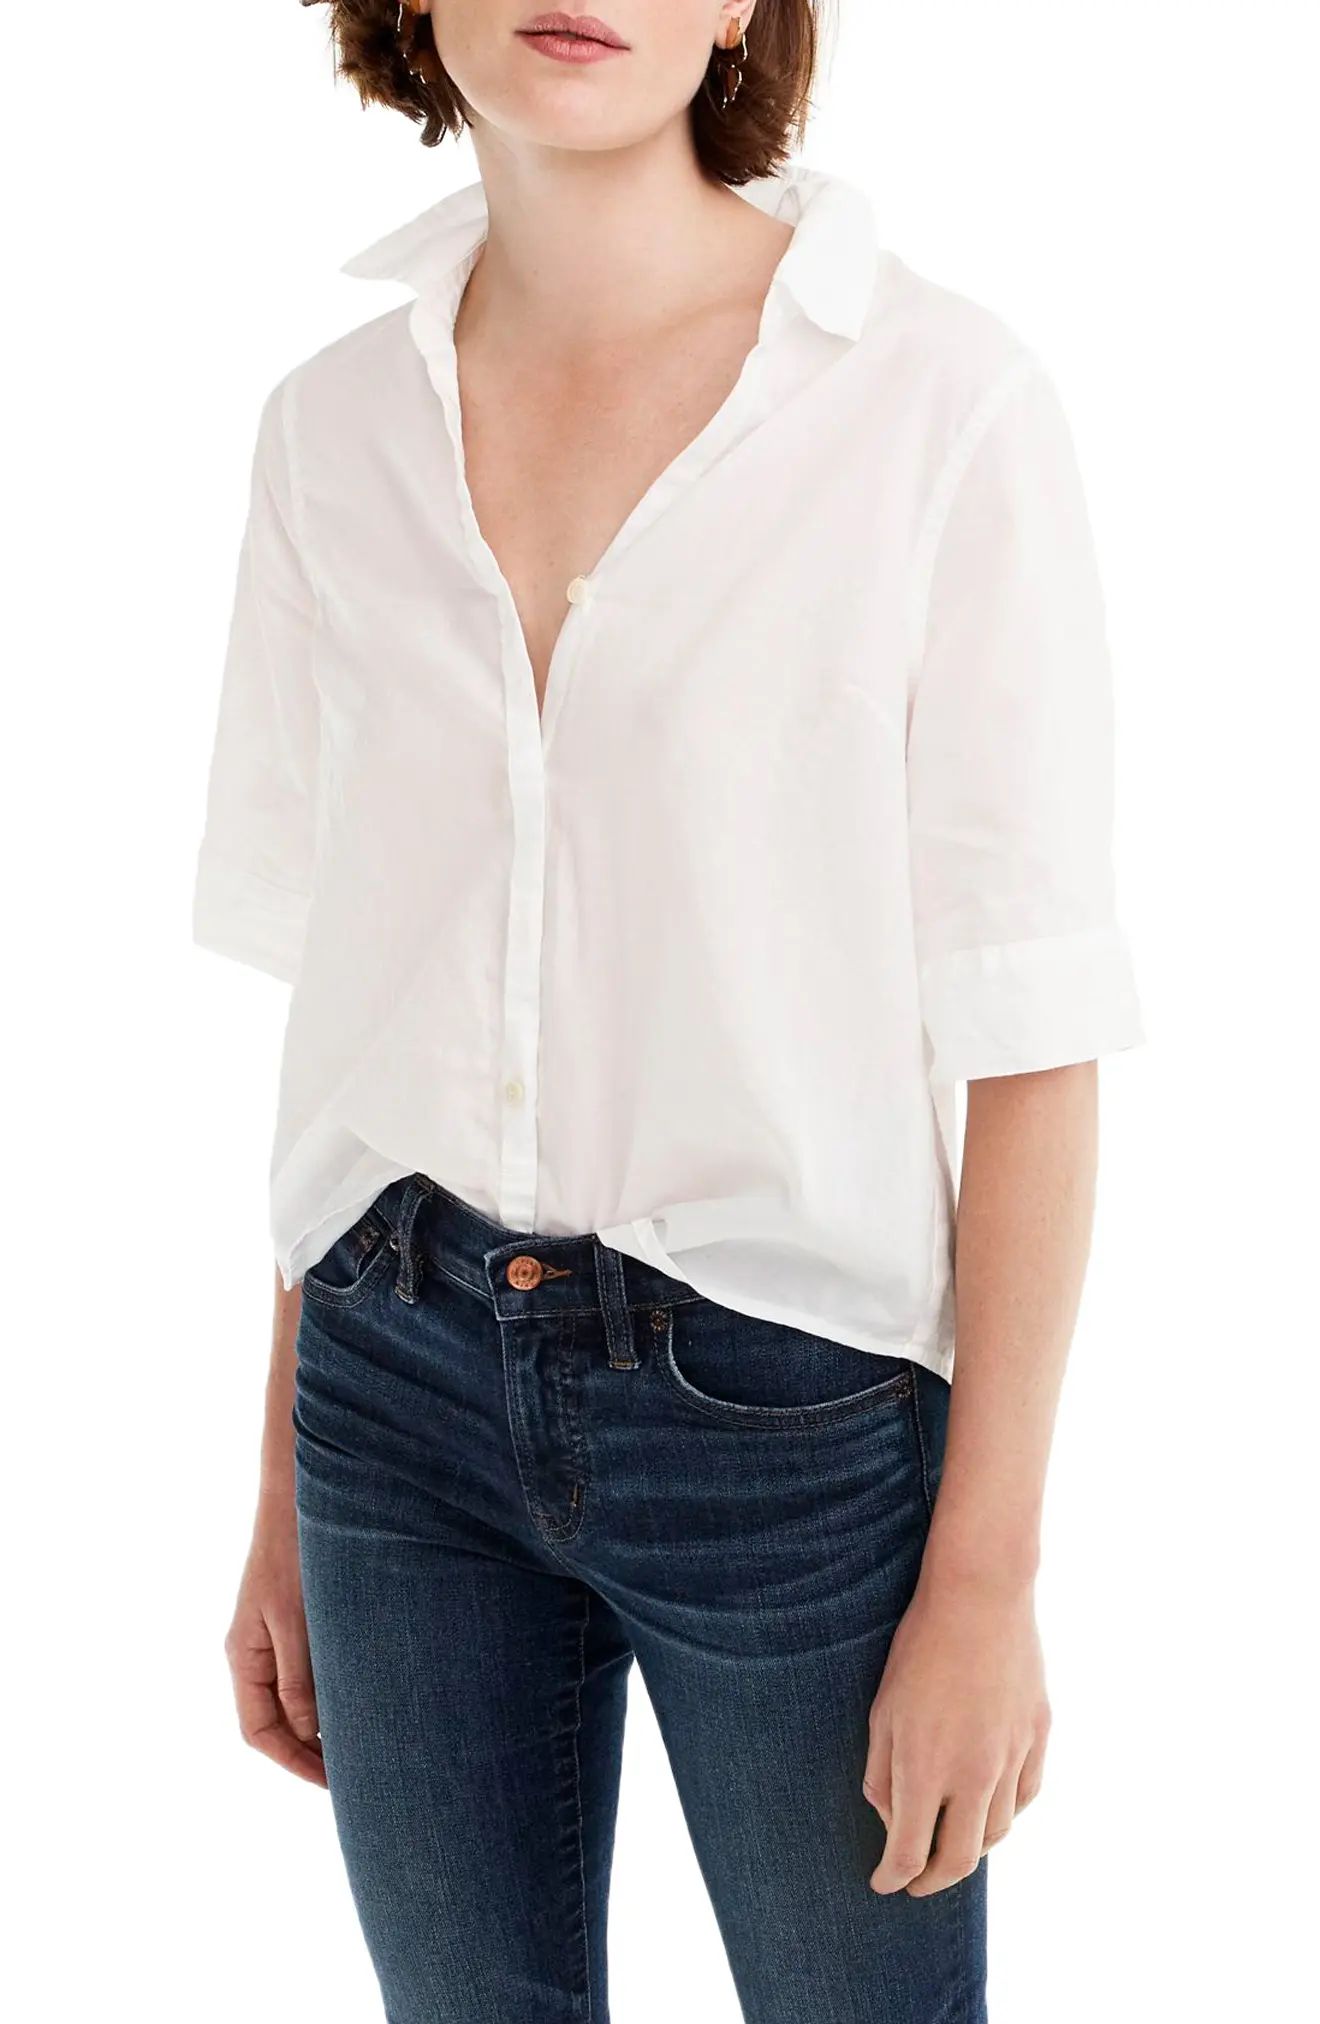 Women's J.crew Short Sleeve Button-Up Shirt, Size Large - White | Nordstrom